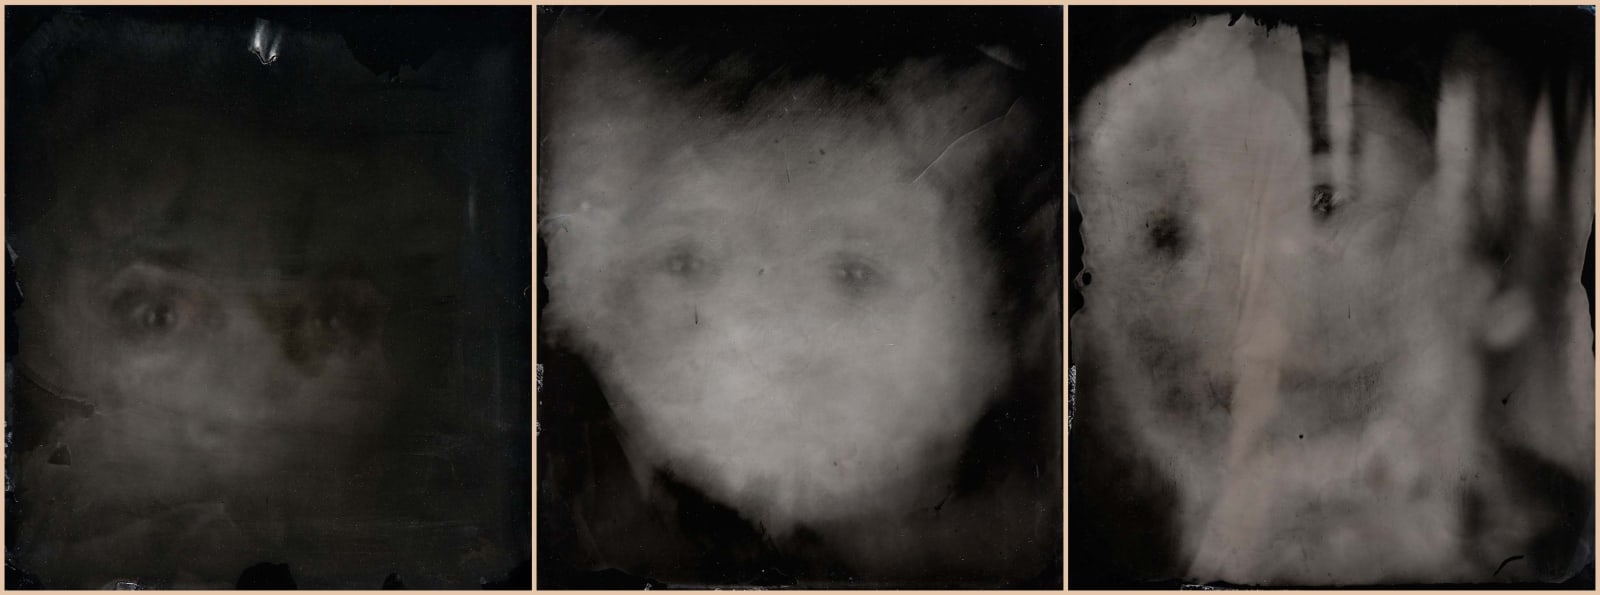 Sally Mann self-portrait ambrotype triptych, from the Upon Reflection exhibition